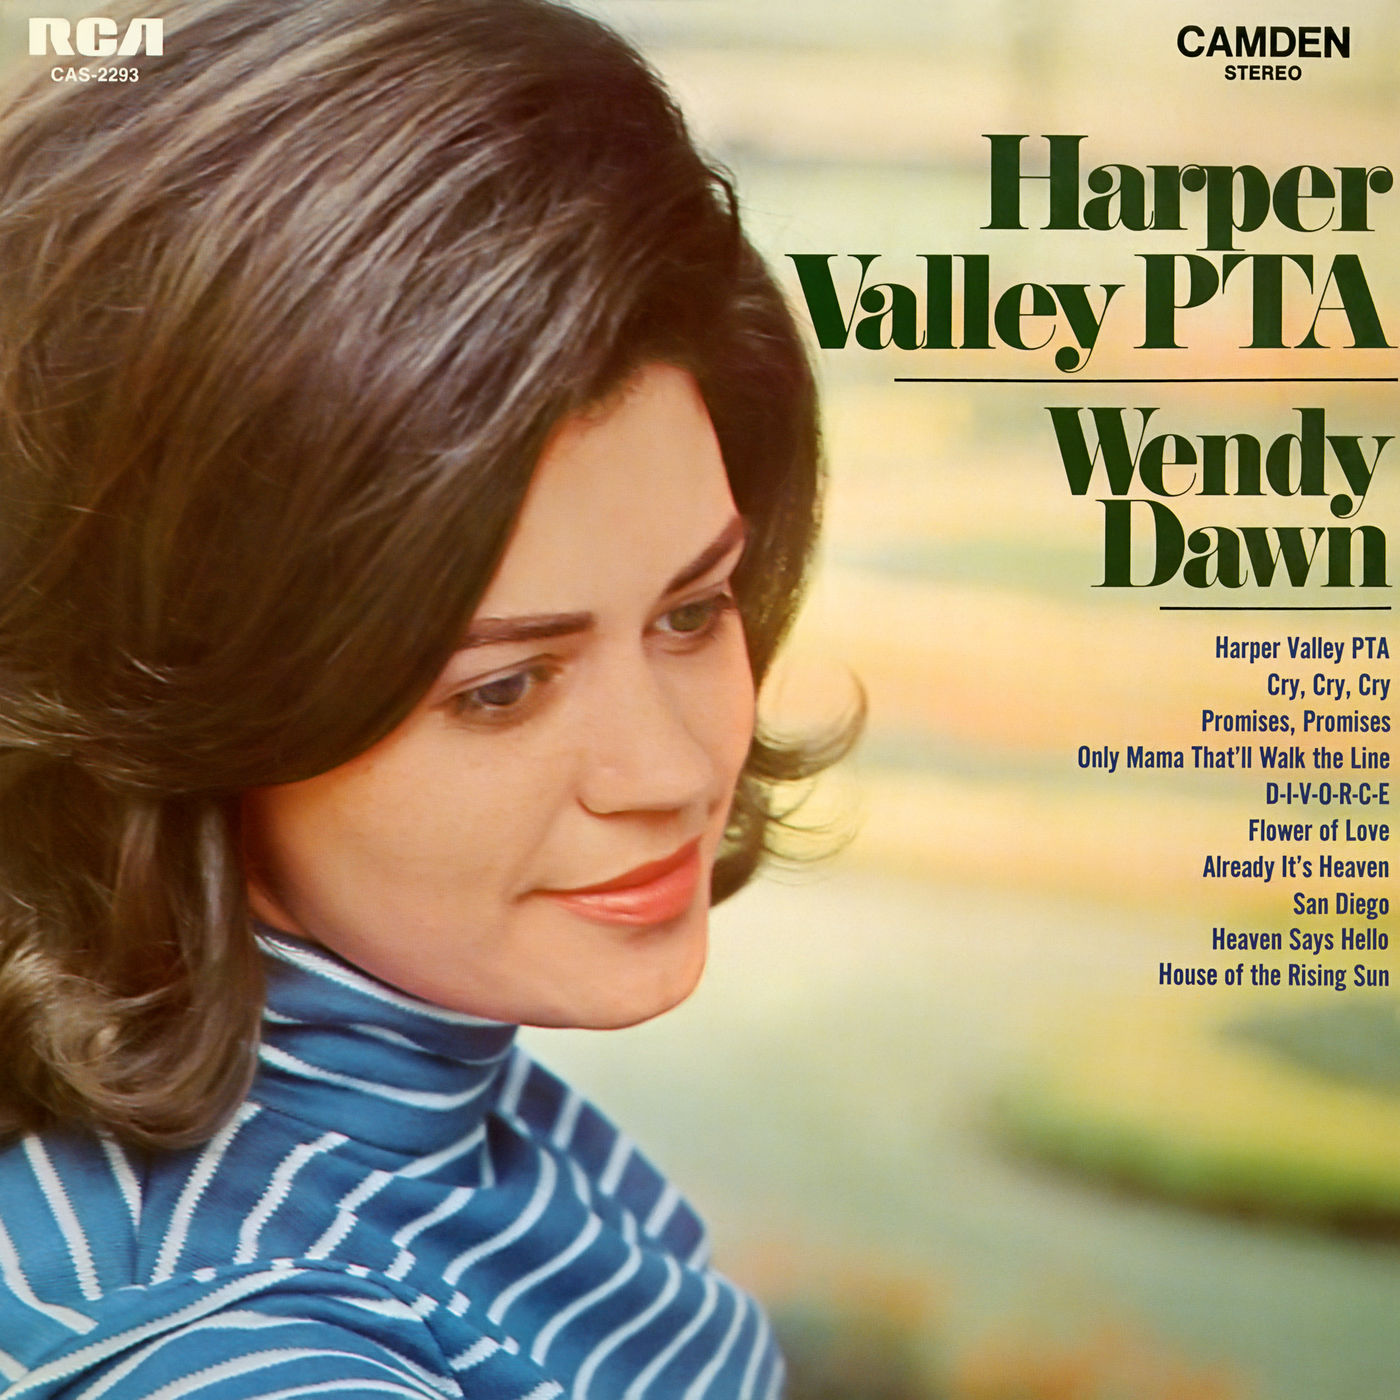 Wendy Dawn – Harper Valley PTA and Other Country Hits